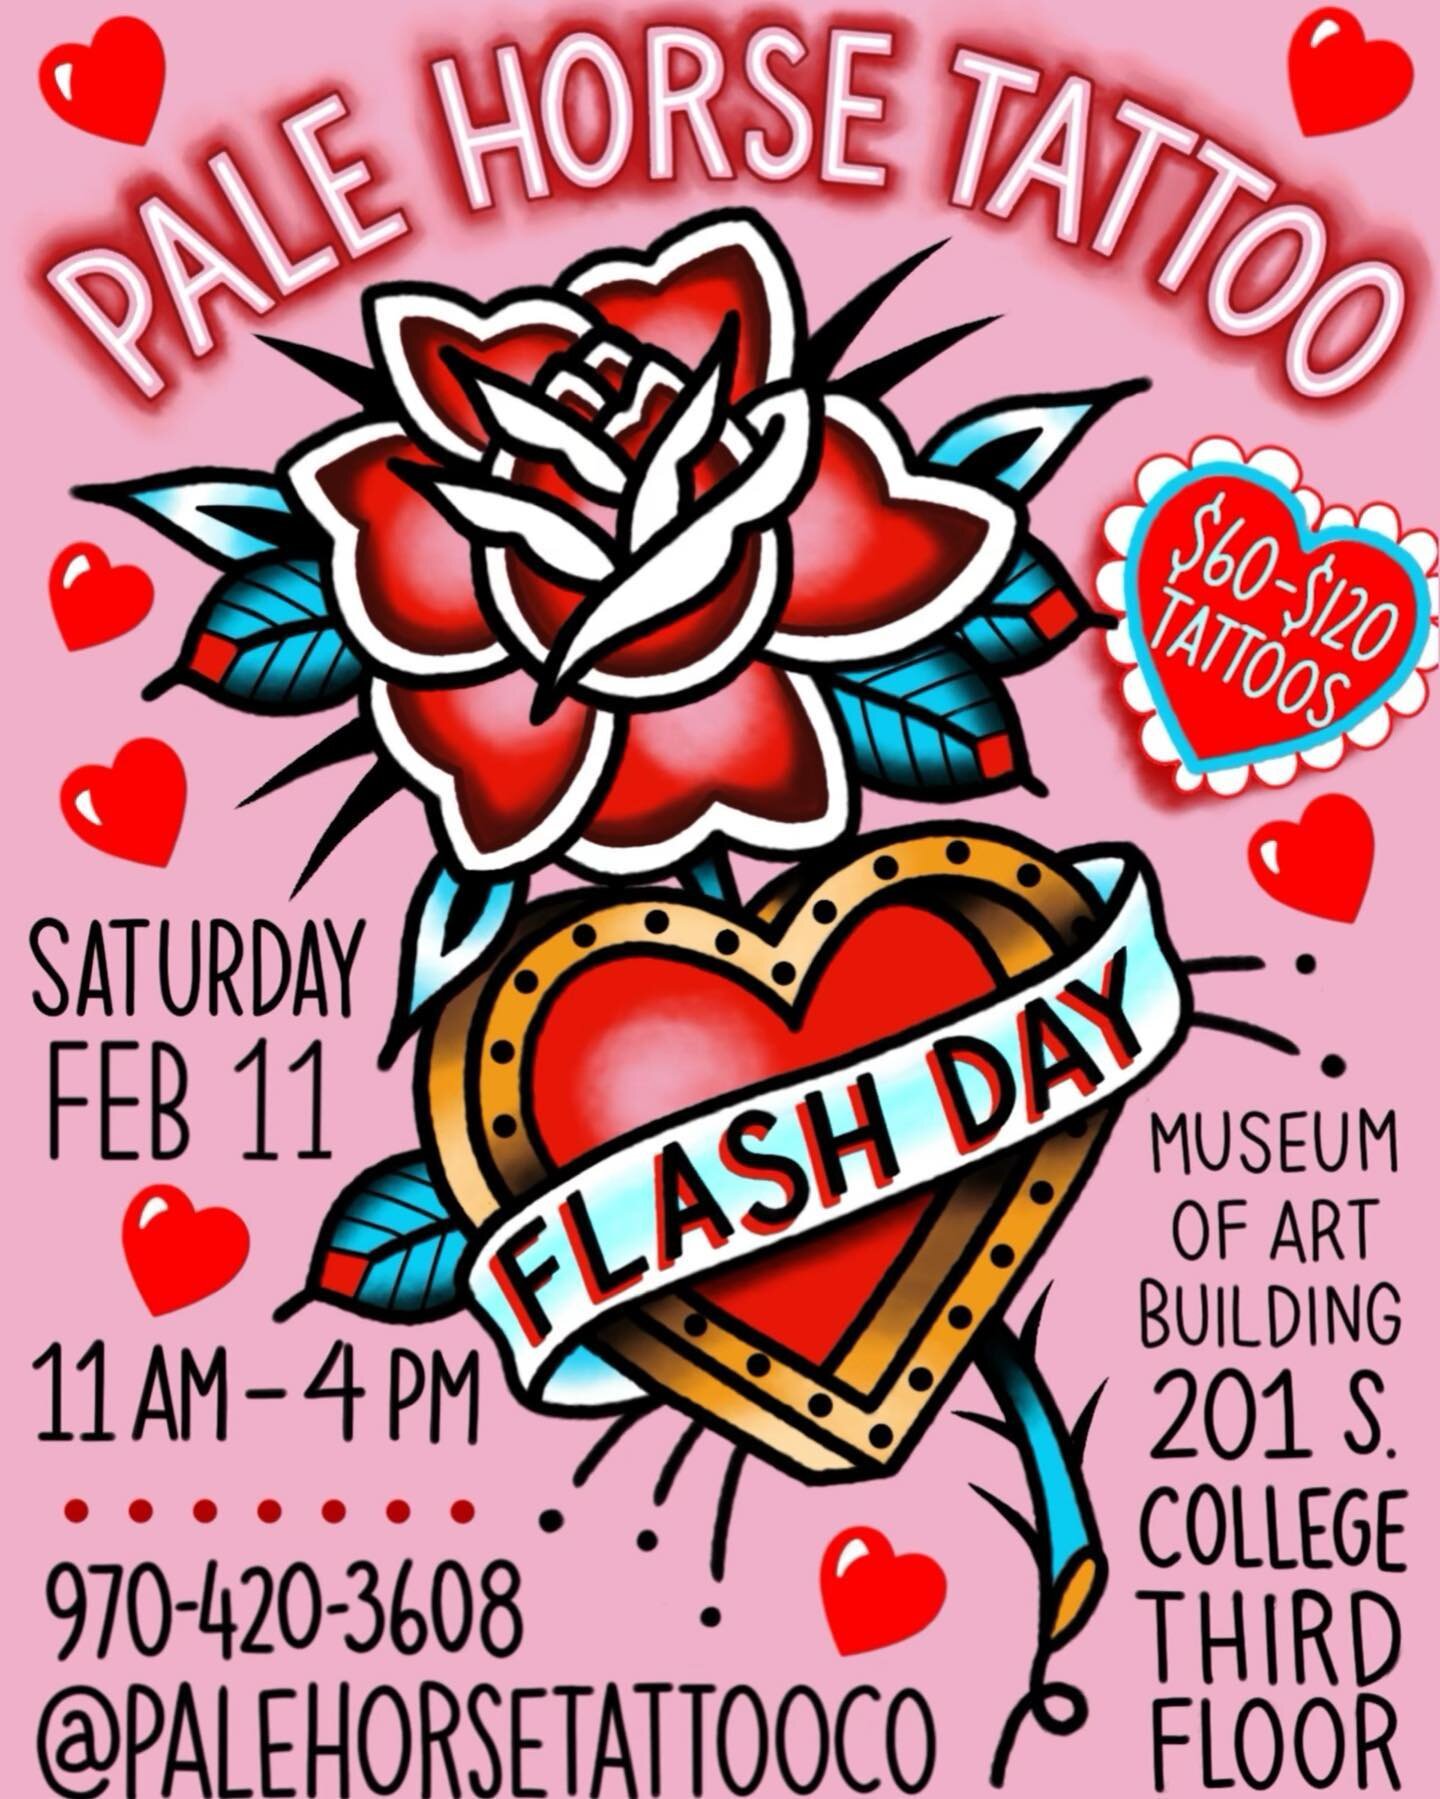 Get excited and bring your date!🥰
 We are throwing a valentines flash event next Saturday! Fill you belly with some snacks and drinks while you get a fun new tattoo! 
#valentinesflashevent #fortcollinstattoo #fortcollinsvalentinesday #coloradotattoo